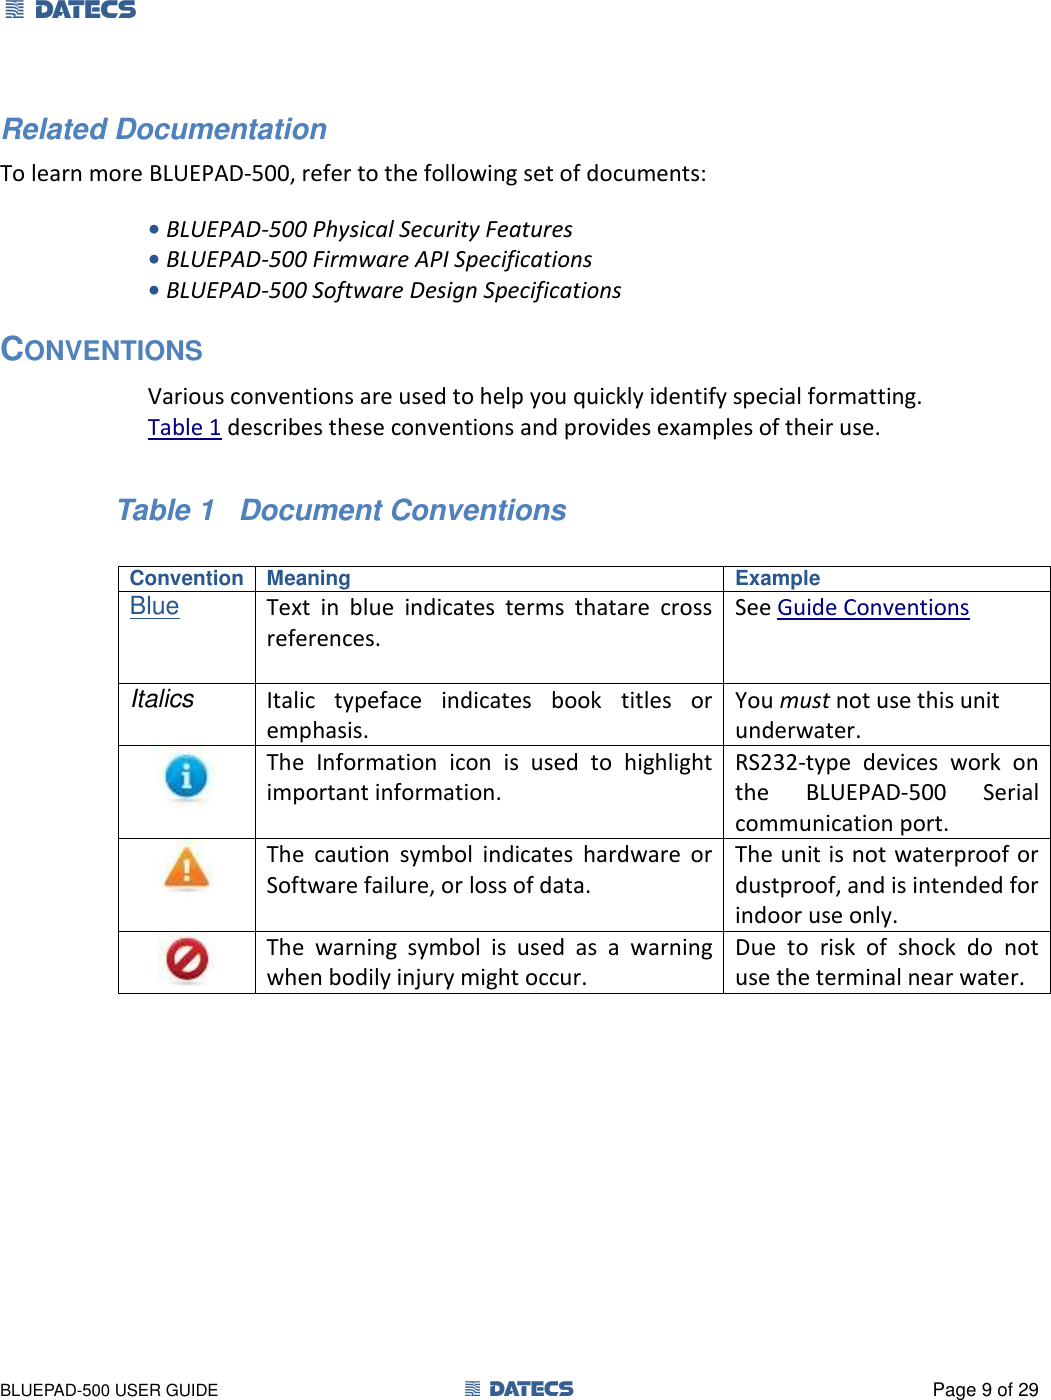 1 DATECS       BLUEPAD-500 USER GUIDE  1 DATECS  Page 9 of 29 Related Documentation To learn more BLUEPAD-500, refer to the following set of documents: • BLUEPAD-500 Physical Security Features • BLUEPAD-500 Firmware API Specifications • BLUEPAD-500 Software Design Specifications CONVENTIONS Various conventions are used to help you quickly identify special formatting.  Table 1 describes these conventions and provides examples of their use.                 Table 1   Document Conventions  Convention Meaning Example Blue Text  in  blue  indicates  terms  thatare  cross references.  See Guide Conventions Italics Italic  typeface  indicates  book  titles  or emphasis. You must not use this unit underwater.  The  Information  icon  is  used  to  highlight important information. RS232-type  devices  work  on the  BLUEPAD-500  Serial communication port.  The  caution  symbol  indicates  hardware  or Software failure, or loss of data. The unit is not waterproof or dustproof, and is intended for indoor use only.  The  warning  symbol  is  used  as  a  warning when bodily injury might occur. Due  to  risk  of  shock  do  not use the terminal near water.  Convention Meaning Example      